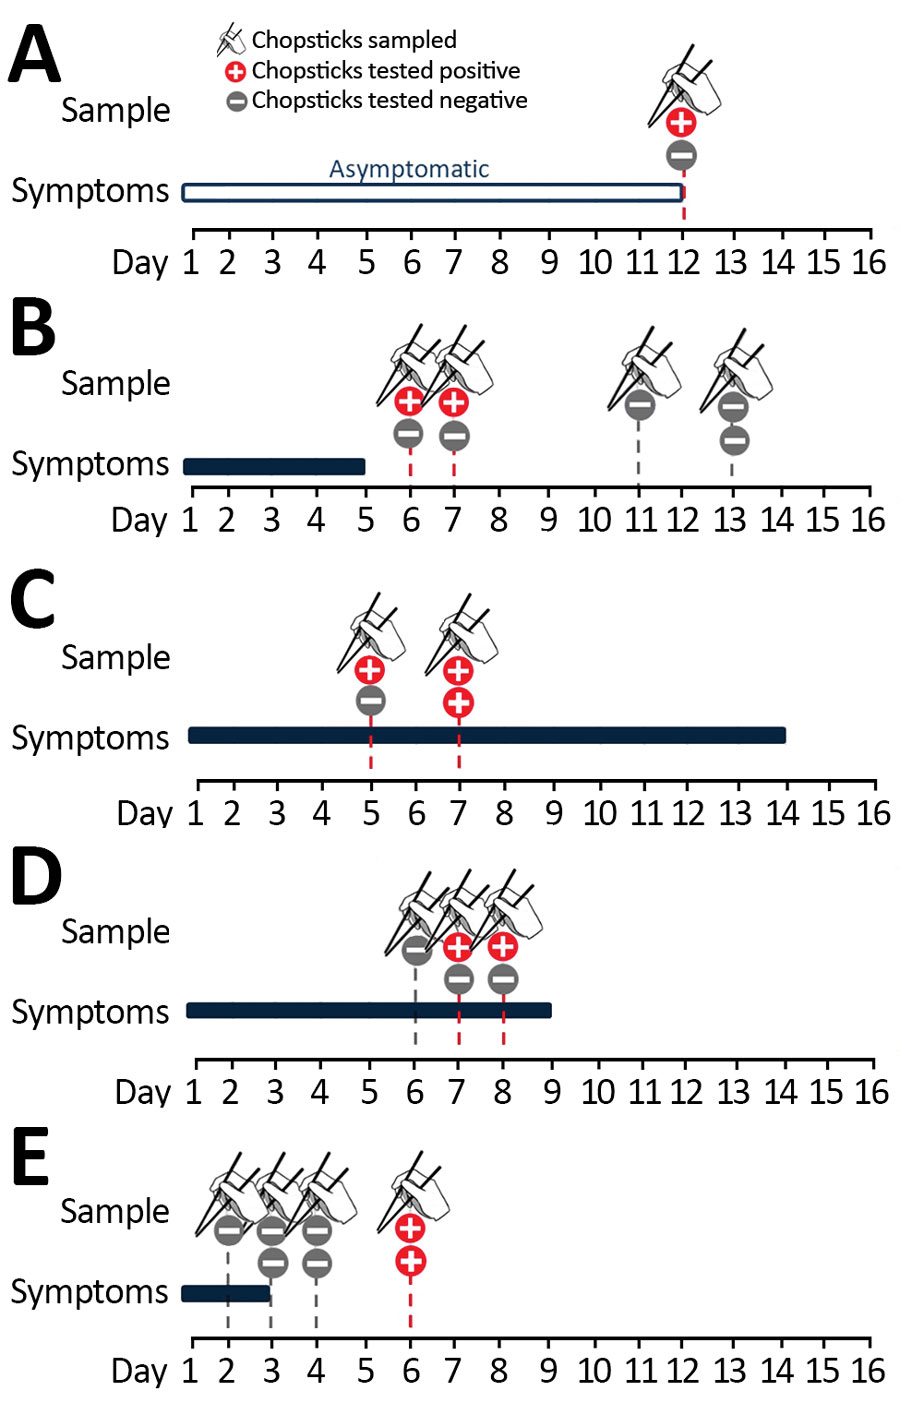 Timelines showing results of severe acute respiratory syndrome coronavirus 2 reverse transcription -PCR testing of chopsticks used by 5 patients in Hong Kong. The results of testing on serial respiratory specimens confirmed that all chopstick samples were collected when patients were shedding viruses from the respiratory tract. A) Patient A was asymptomatic. B) Patient B was postsymptomatic. C) Patient C had severe infection with pneumonia and desaturation. D) Patient D had moderate infection wi